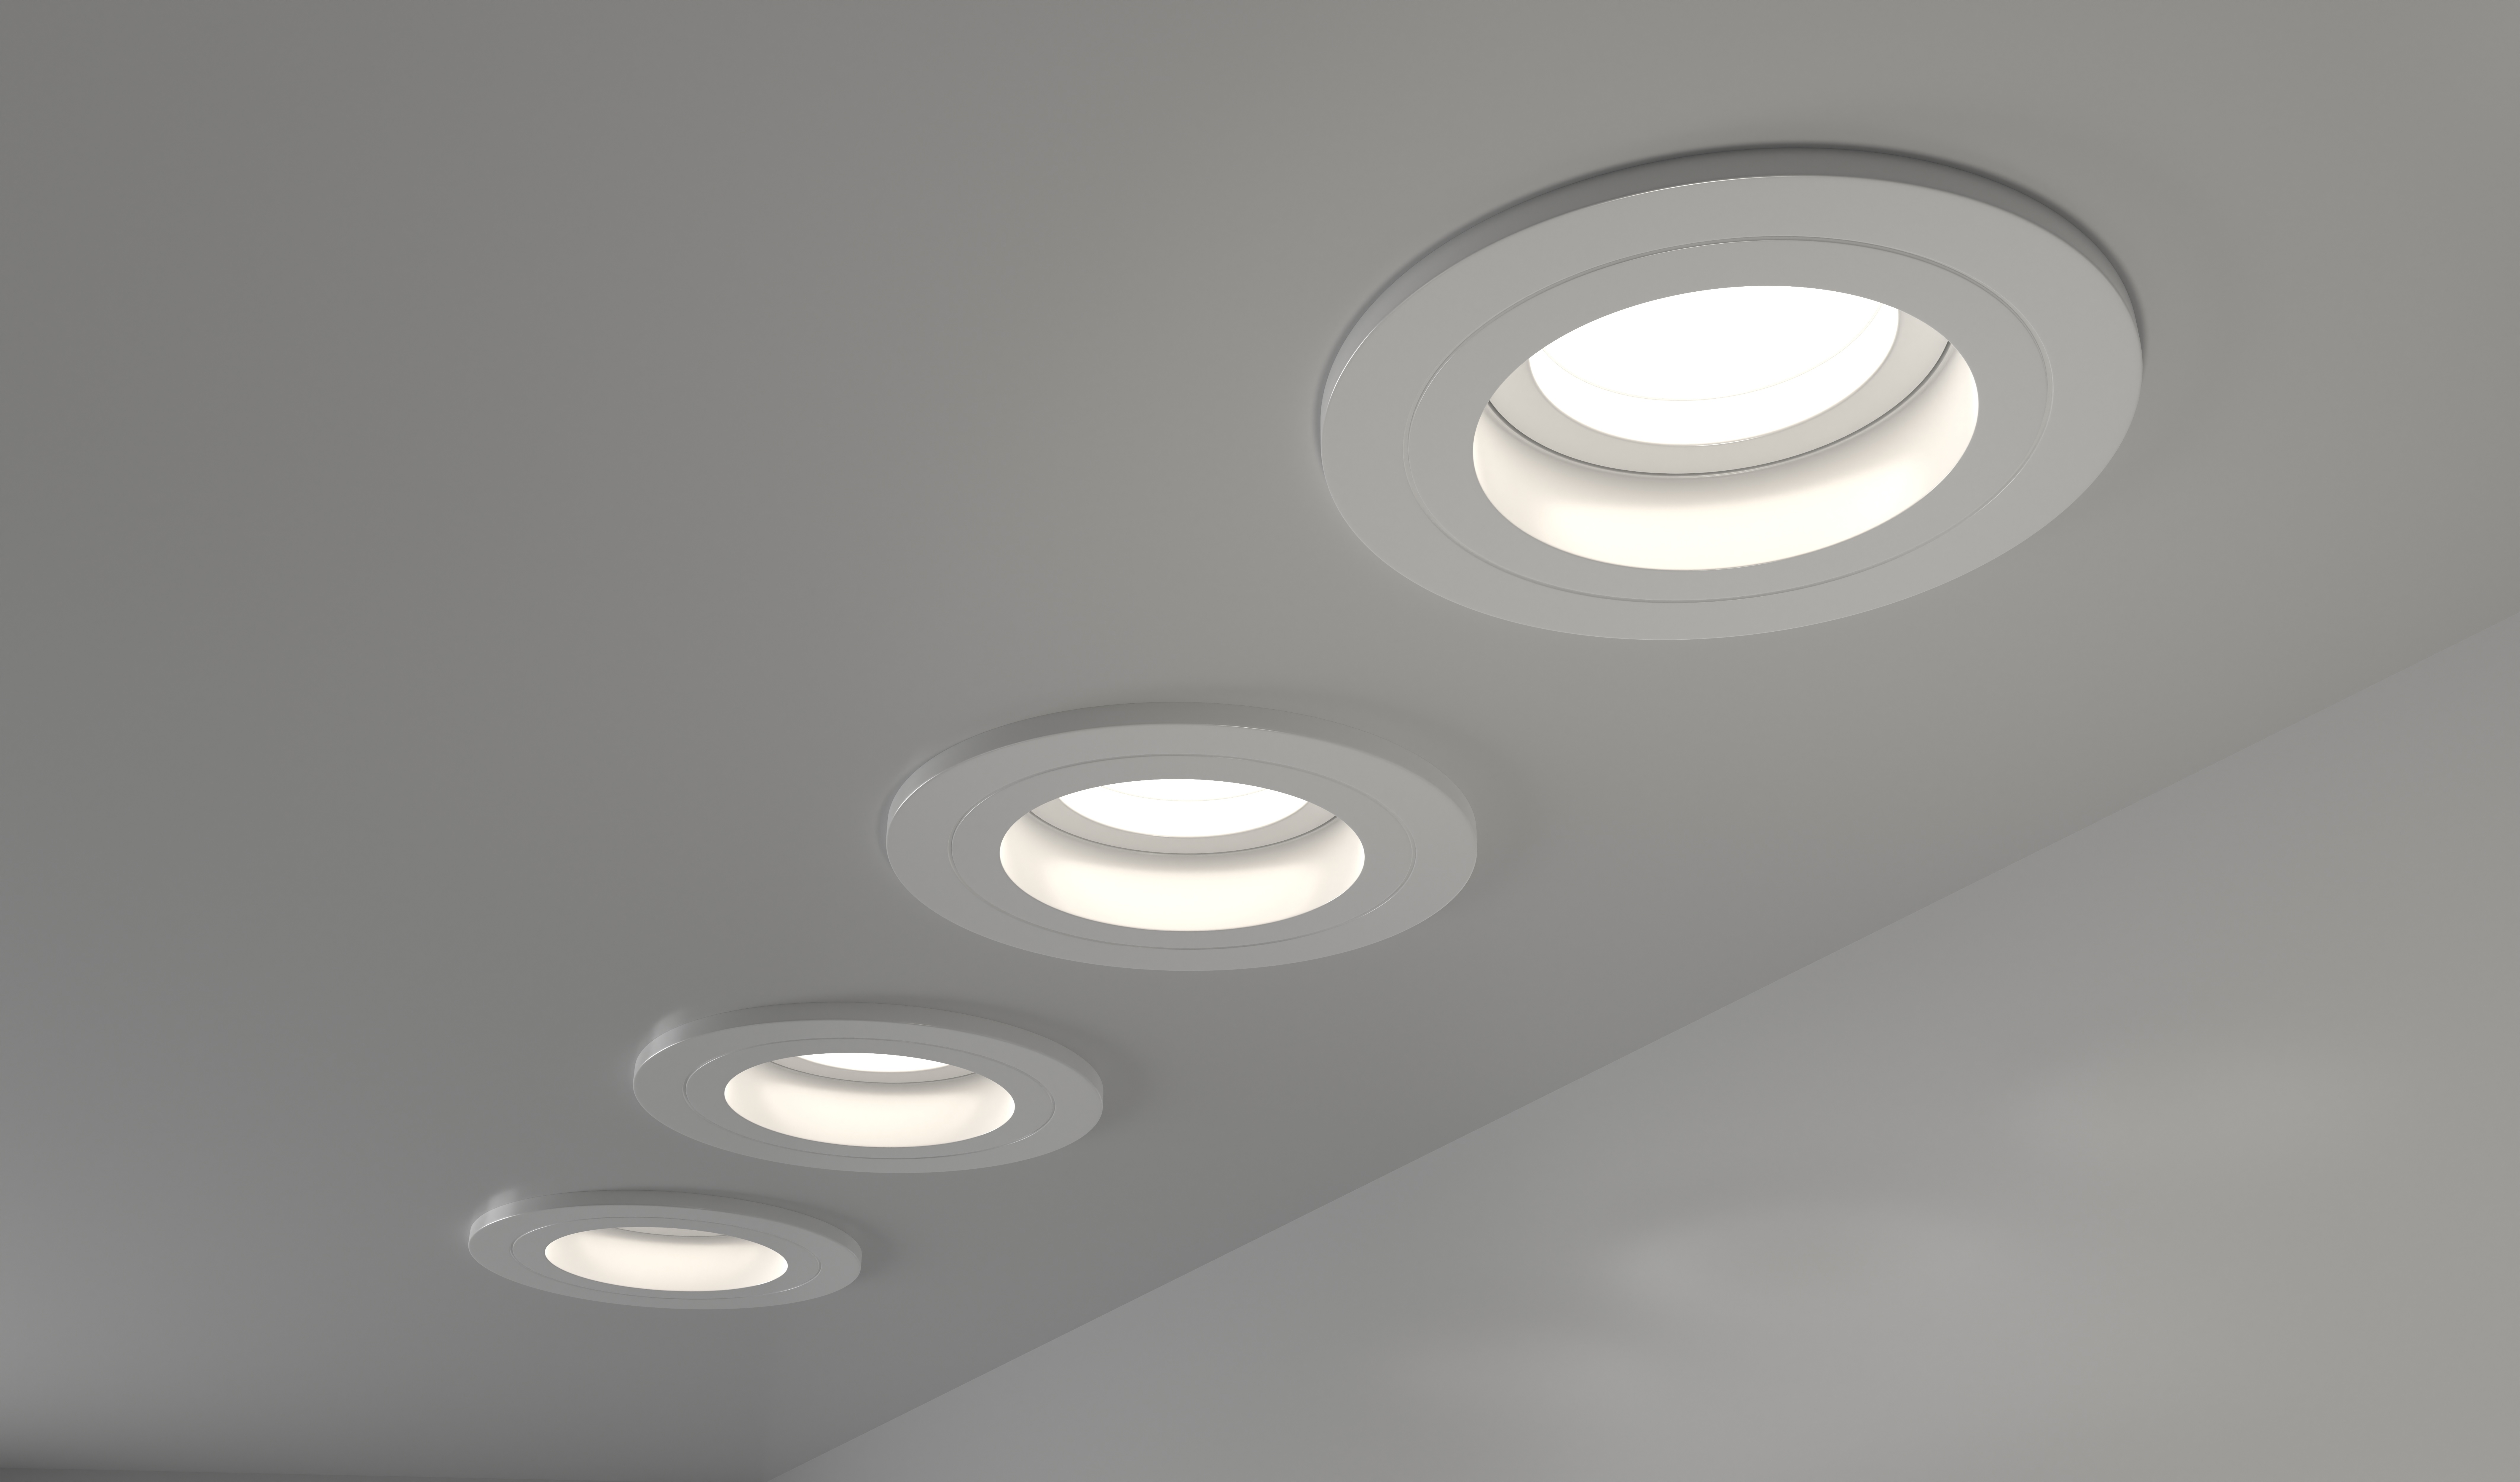 Recessed Can Lighting Installation